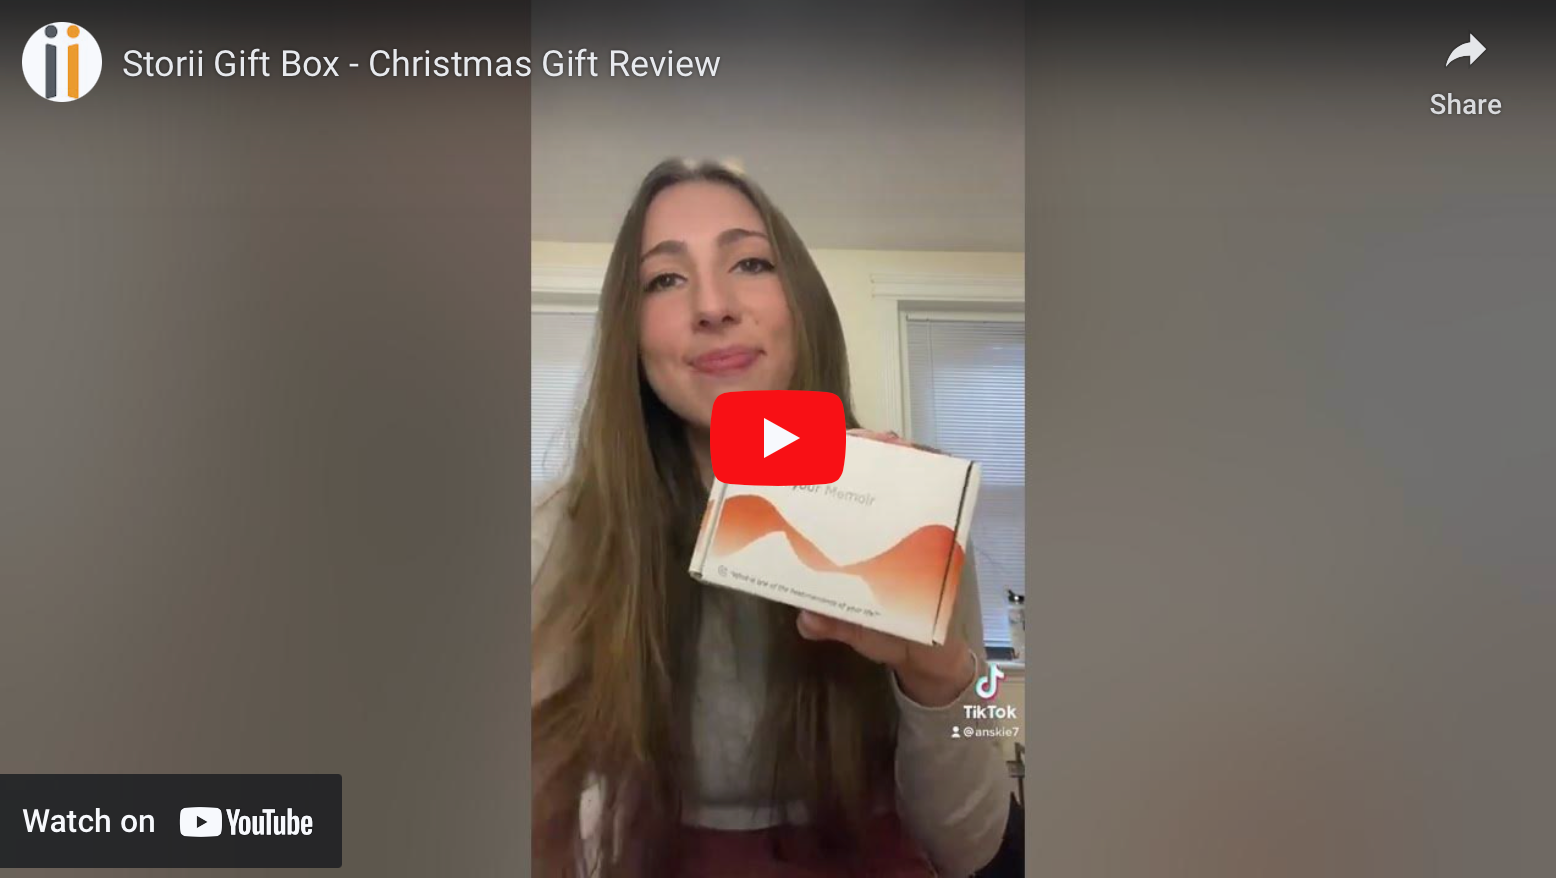 Load video: Storii Gift Box - Christmas Gift Review